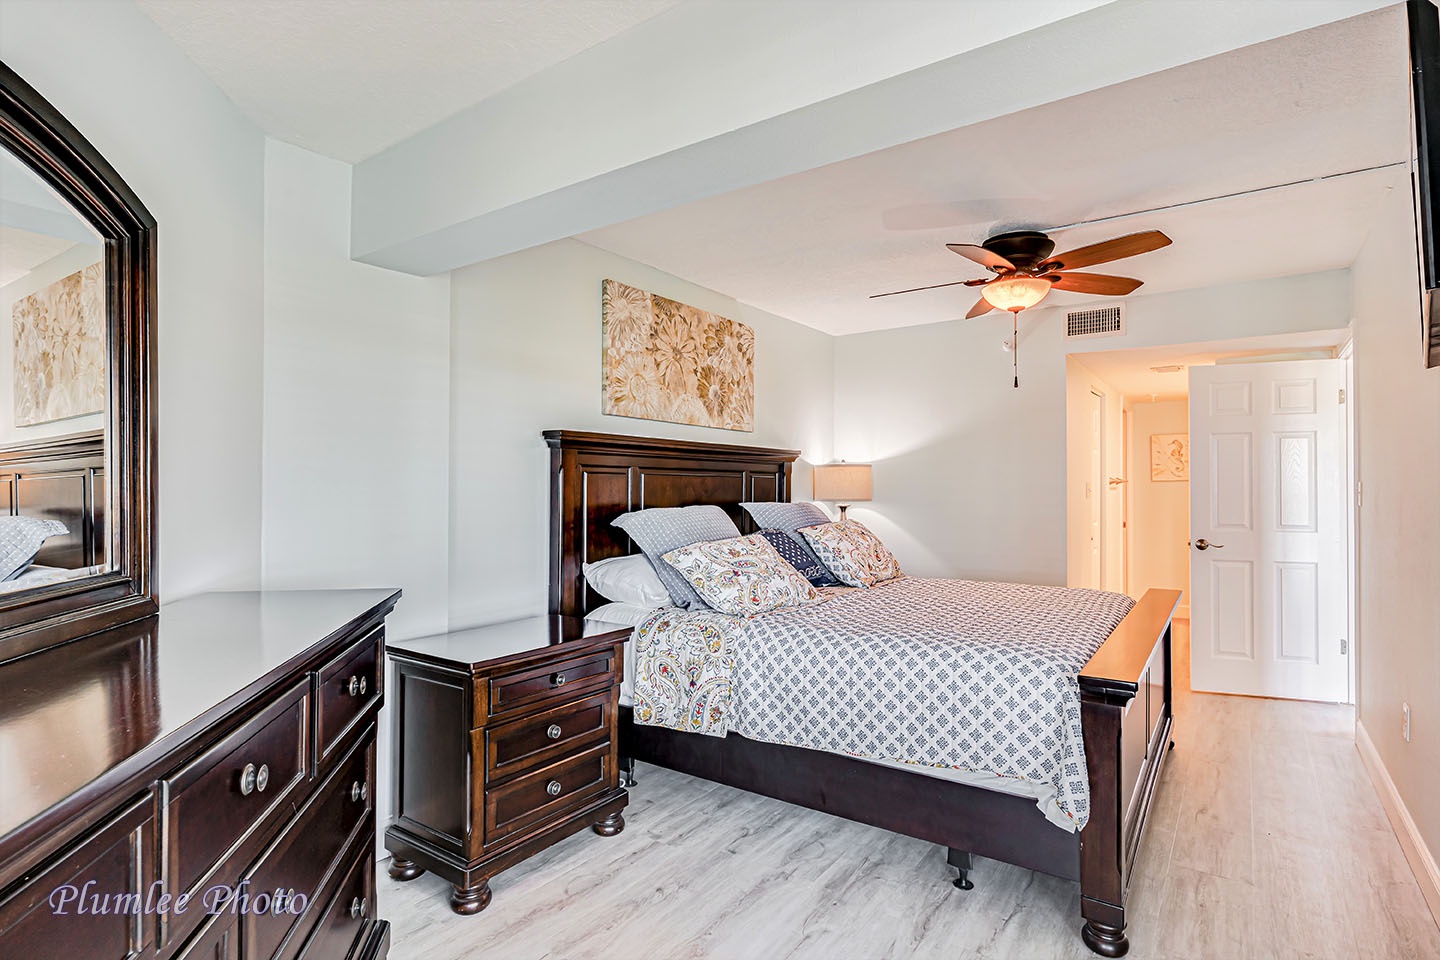 Plenty of space to spread out in the master bedroom.